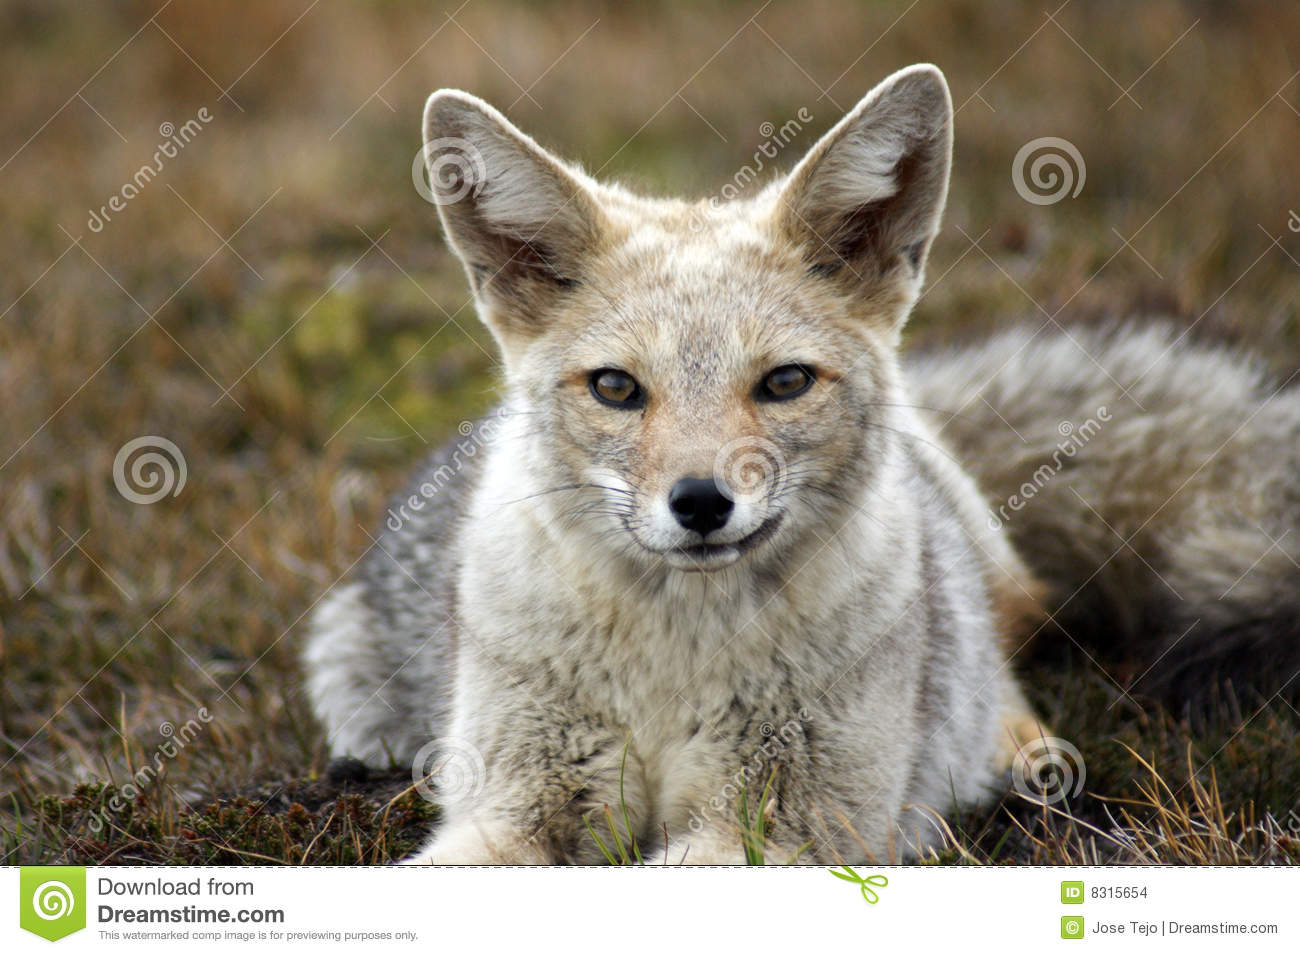 Gray Fox Stock Images   Image  8315654